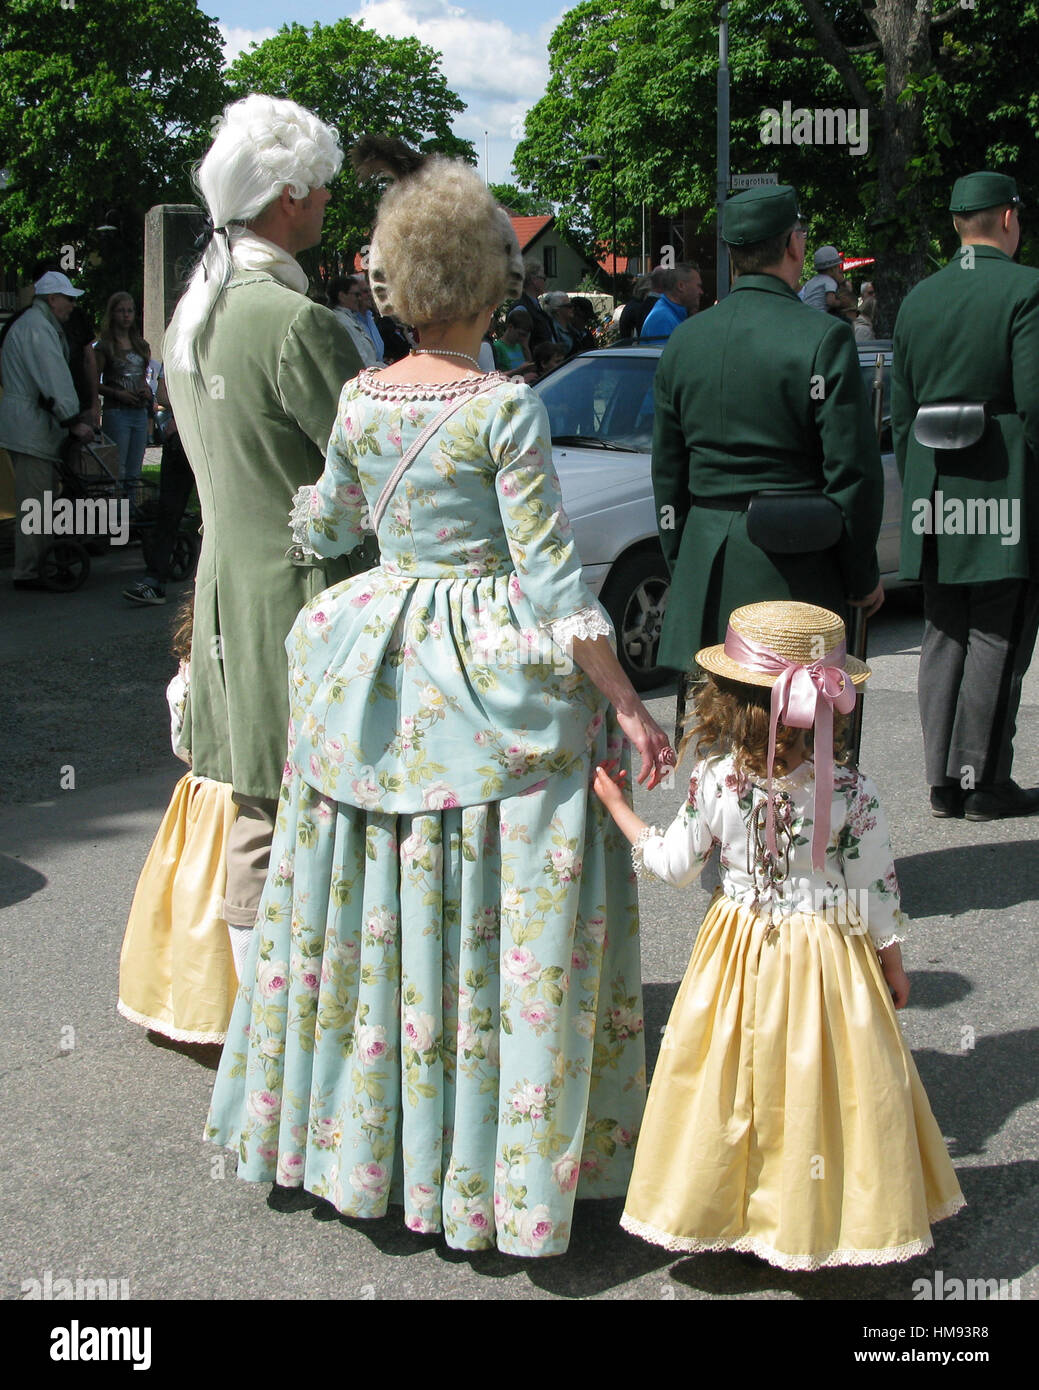 FAMILY dressed in old costumes in a parade Stock Photo